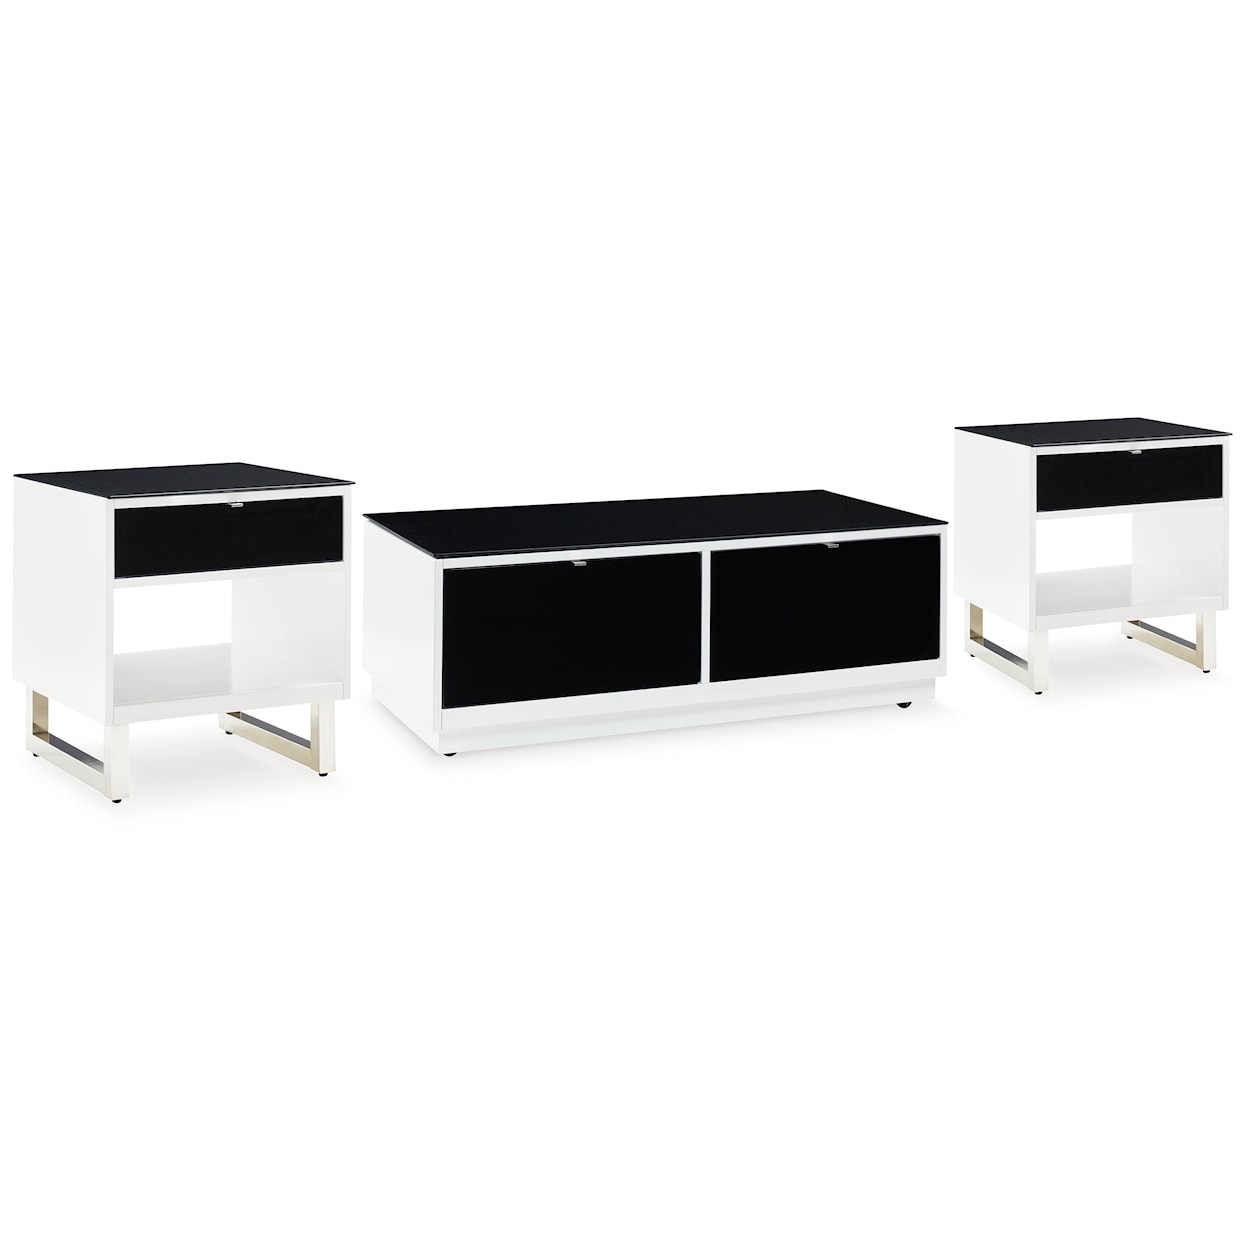 Signature Design by Ashley Gardoni Coffee Table and 2 End Tables